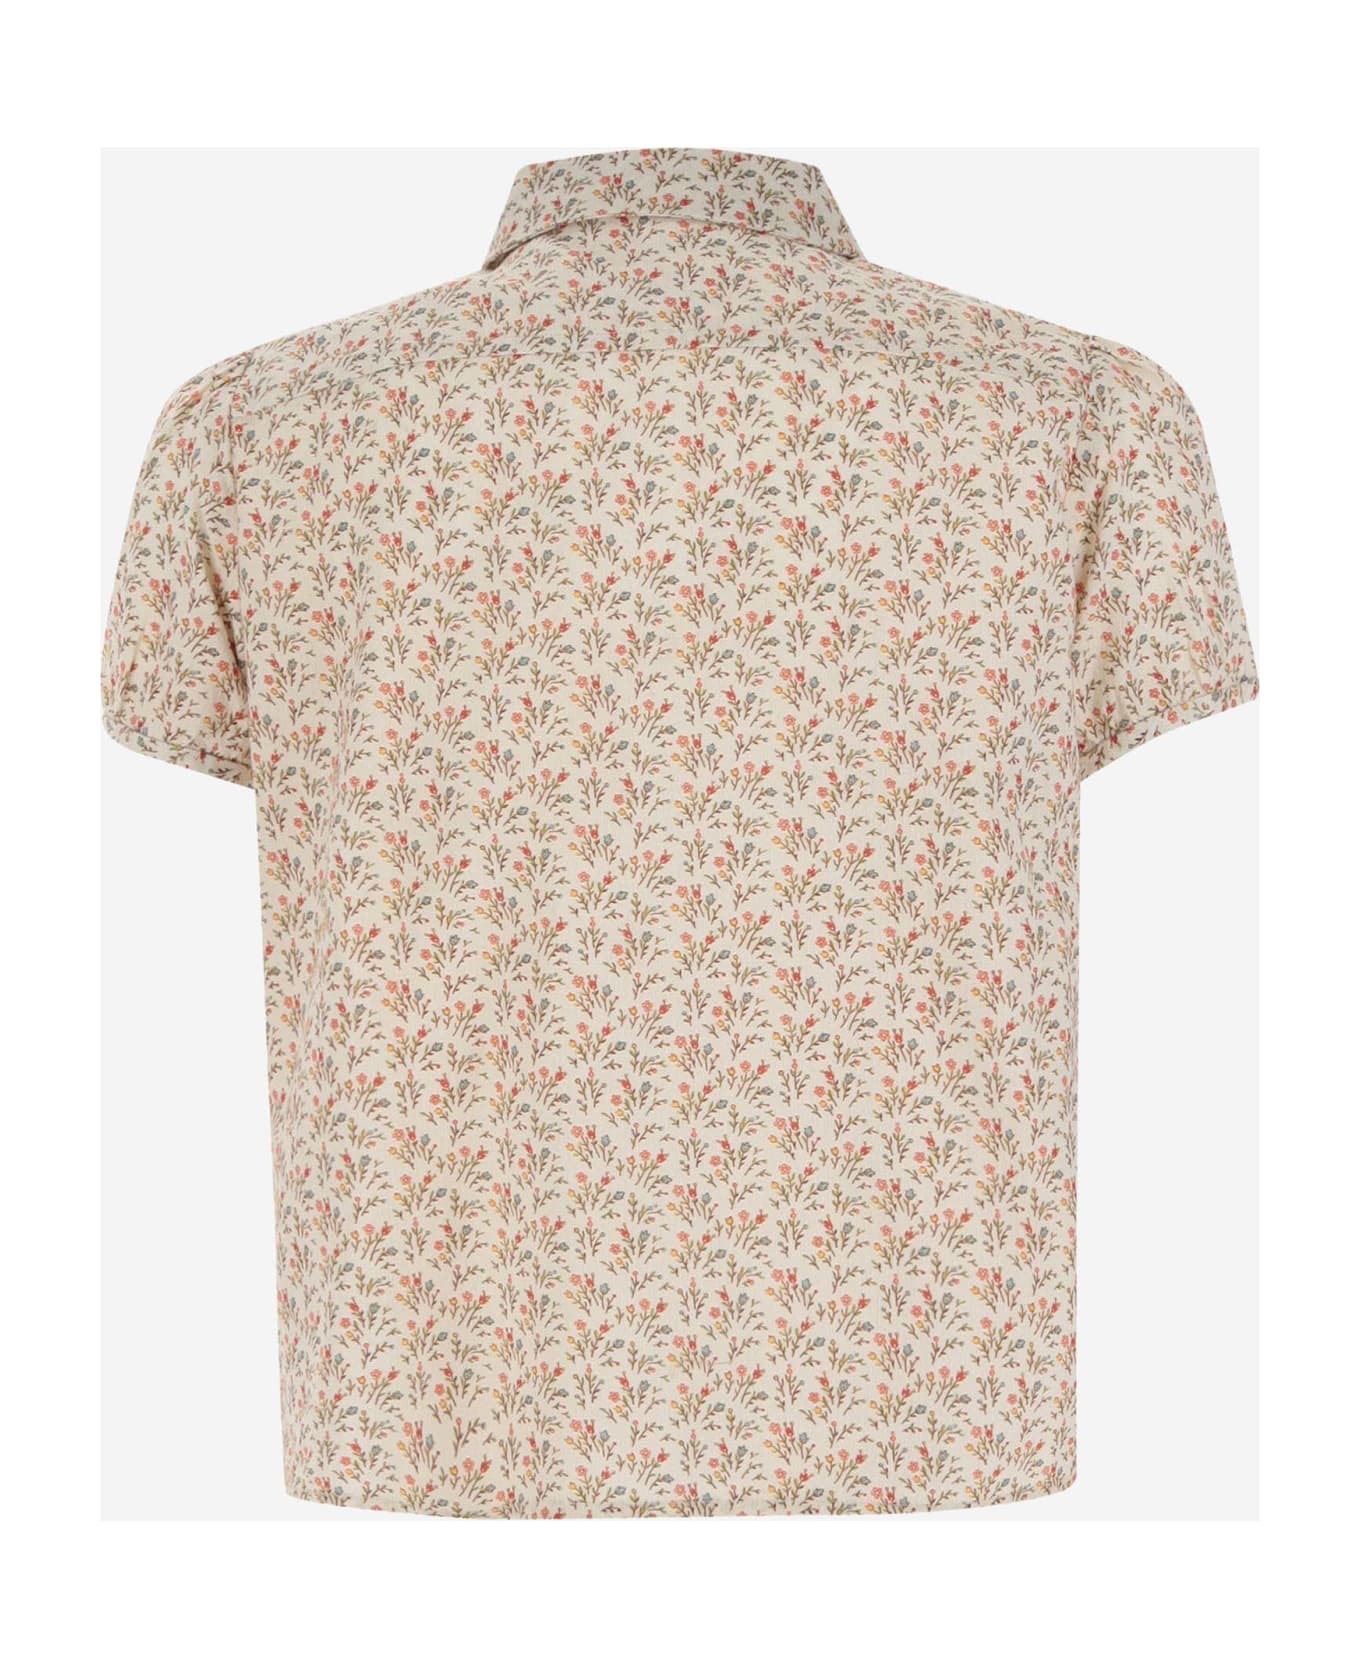 Bonpoint Cotton Shirt With Floral Pattern - Red